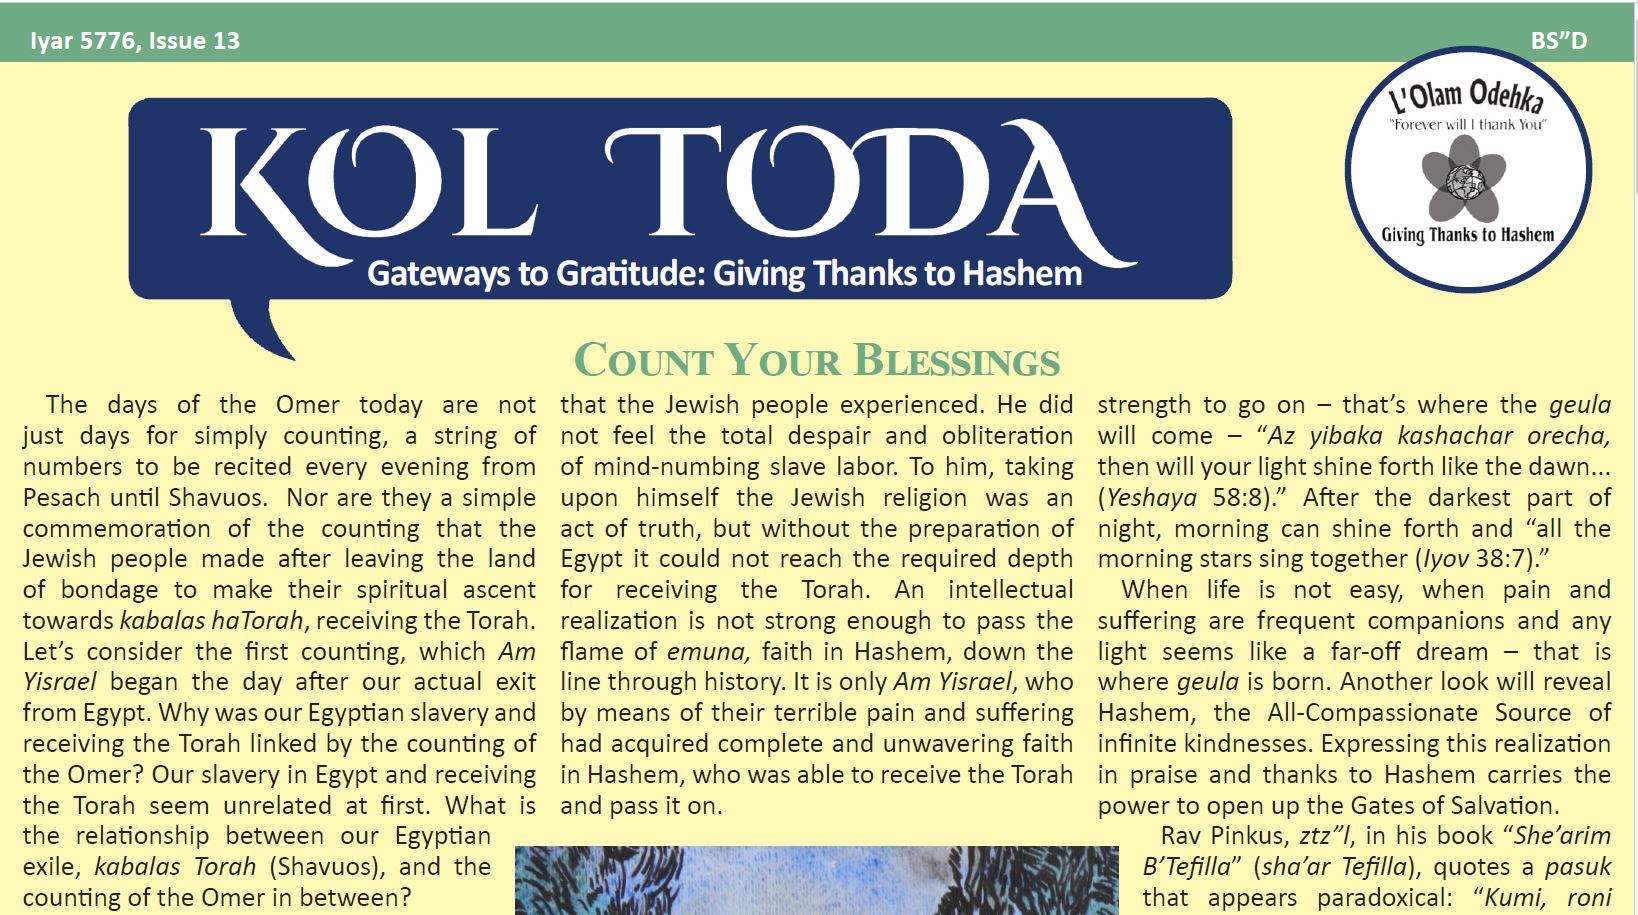 giving thanks to 'hashem